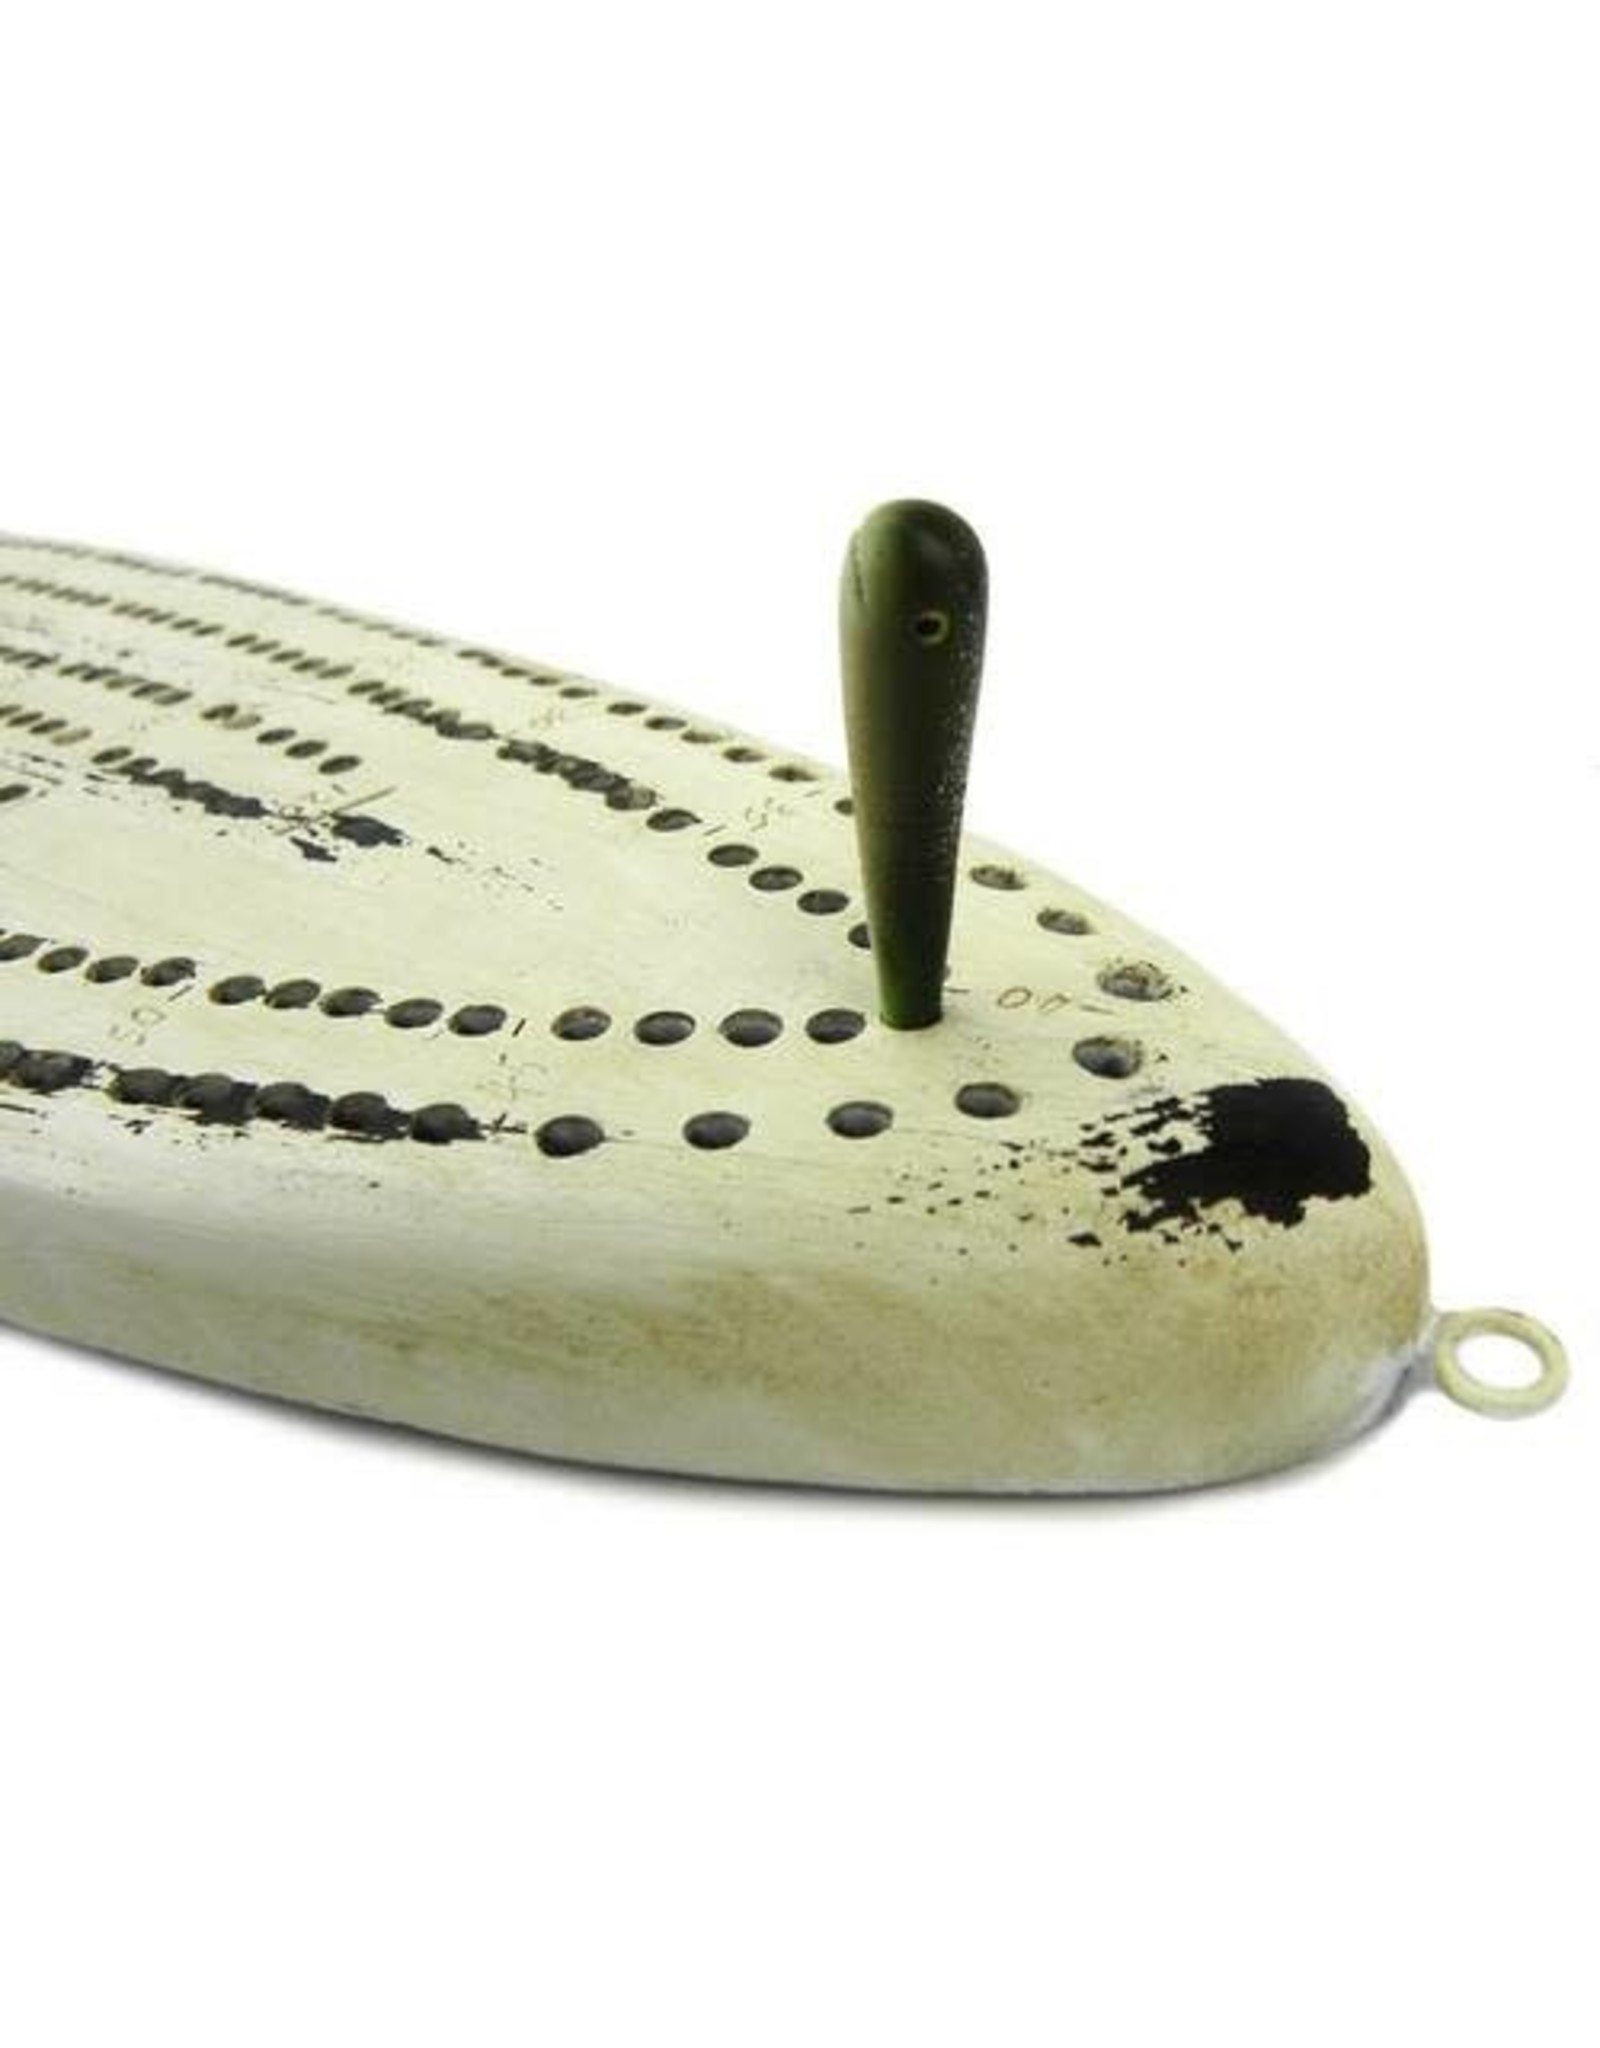 Rivers Edge Products Cribbage Board - Antique Lure